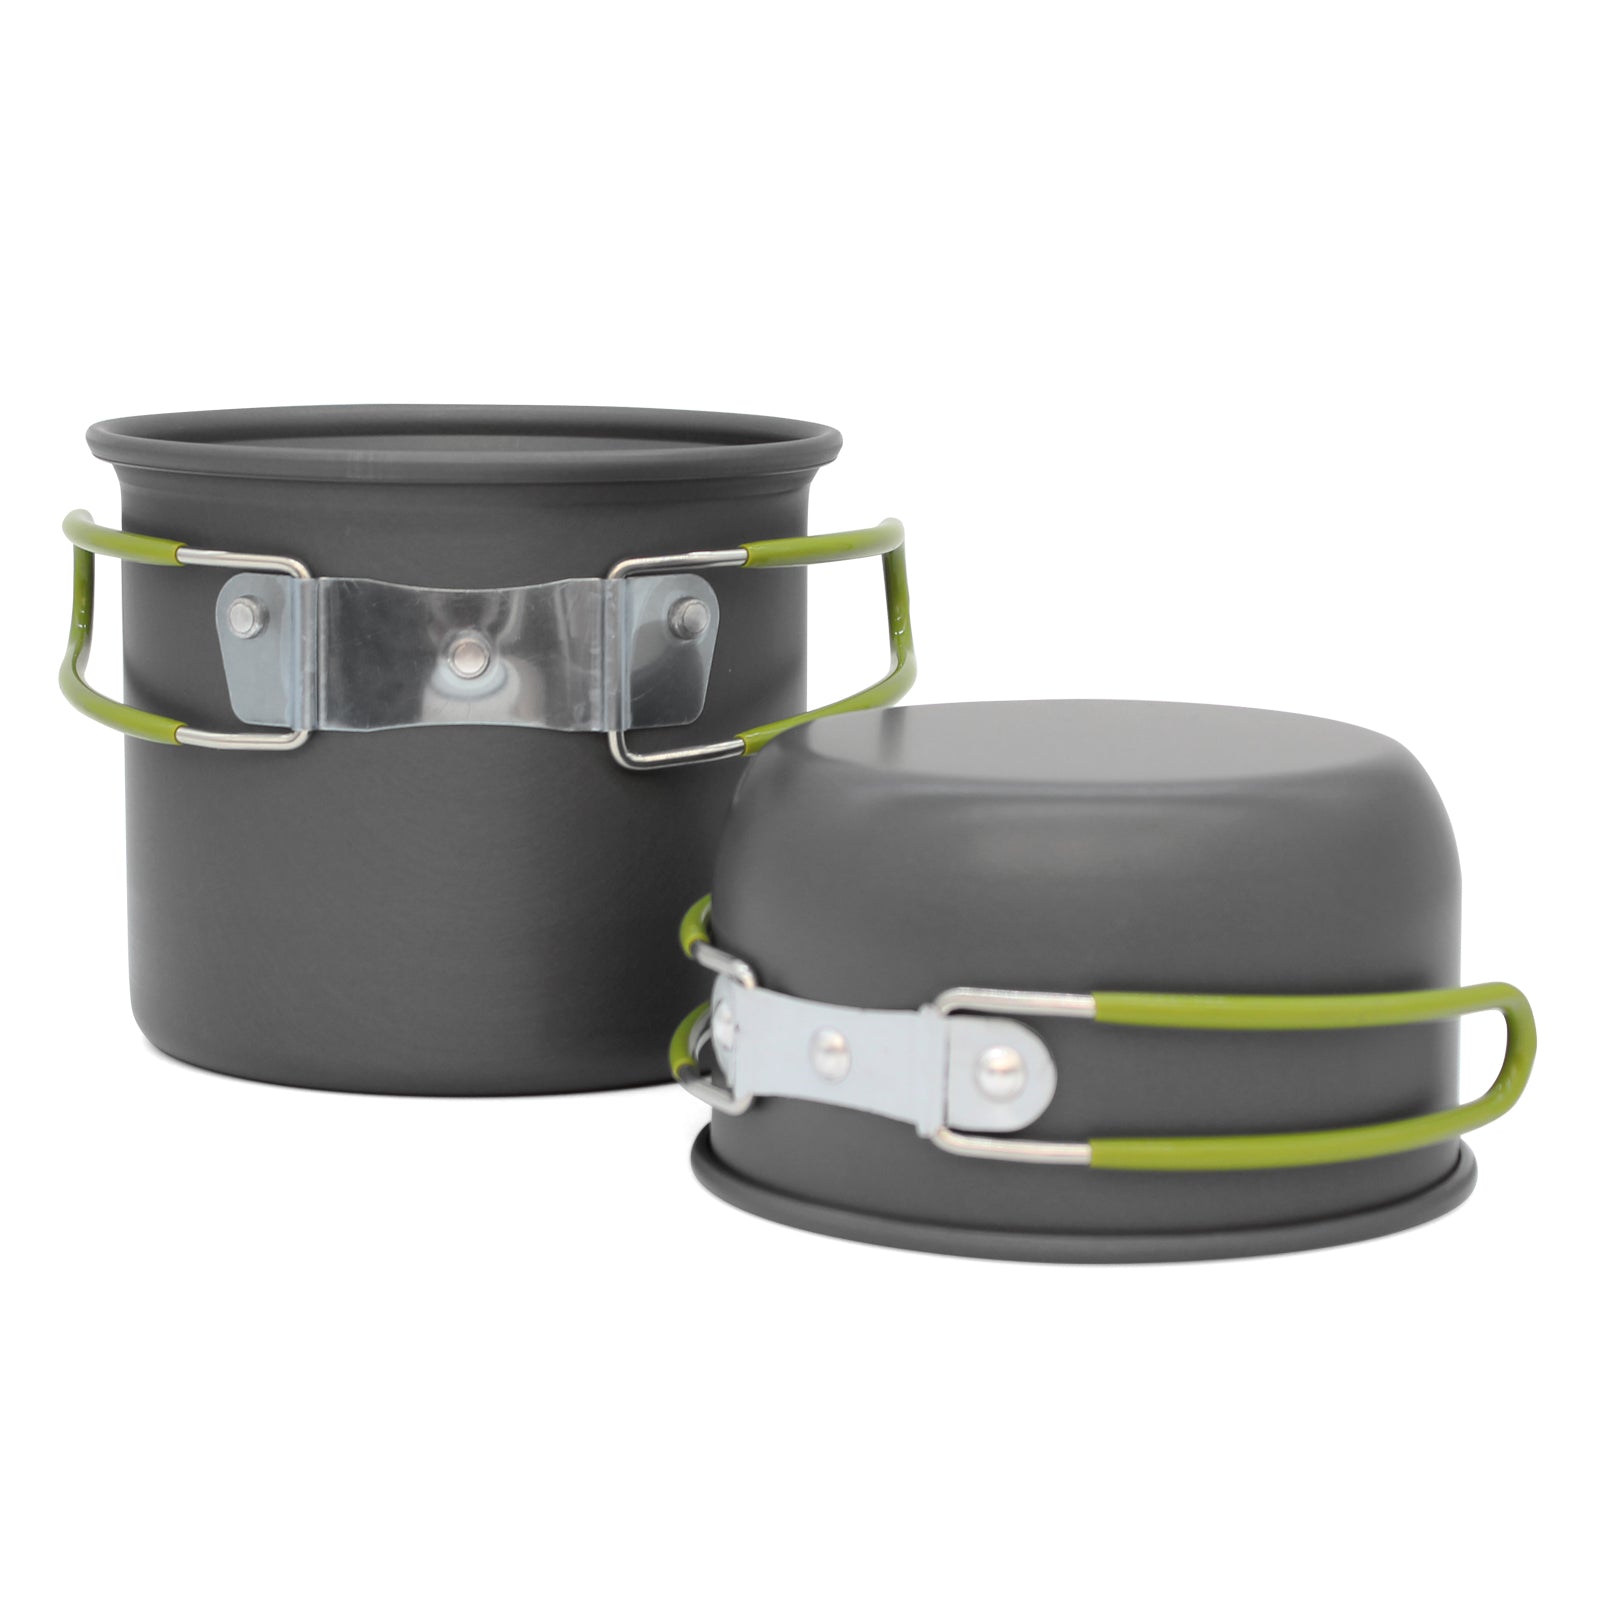 Trekkers Lightweight Cooking Set Box Two Sized Pots